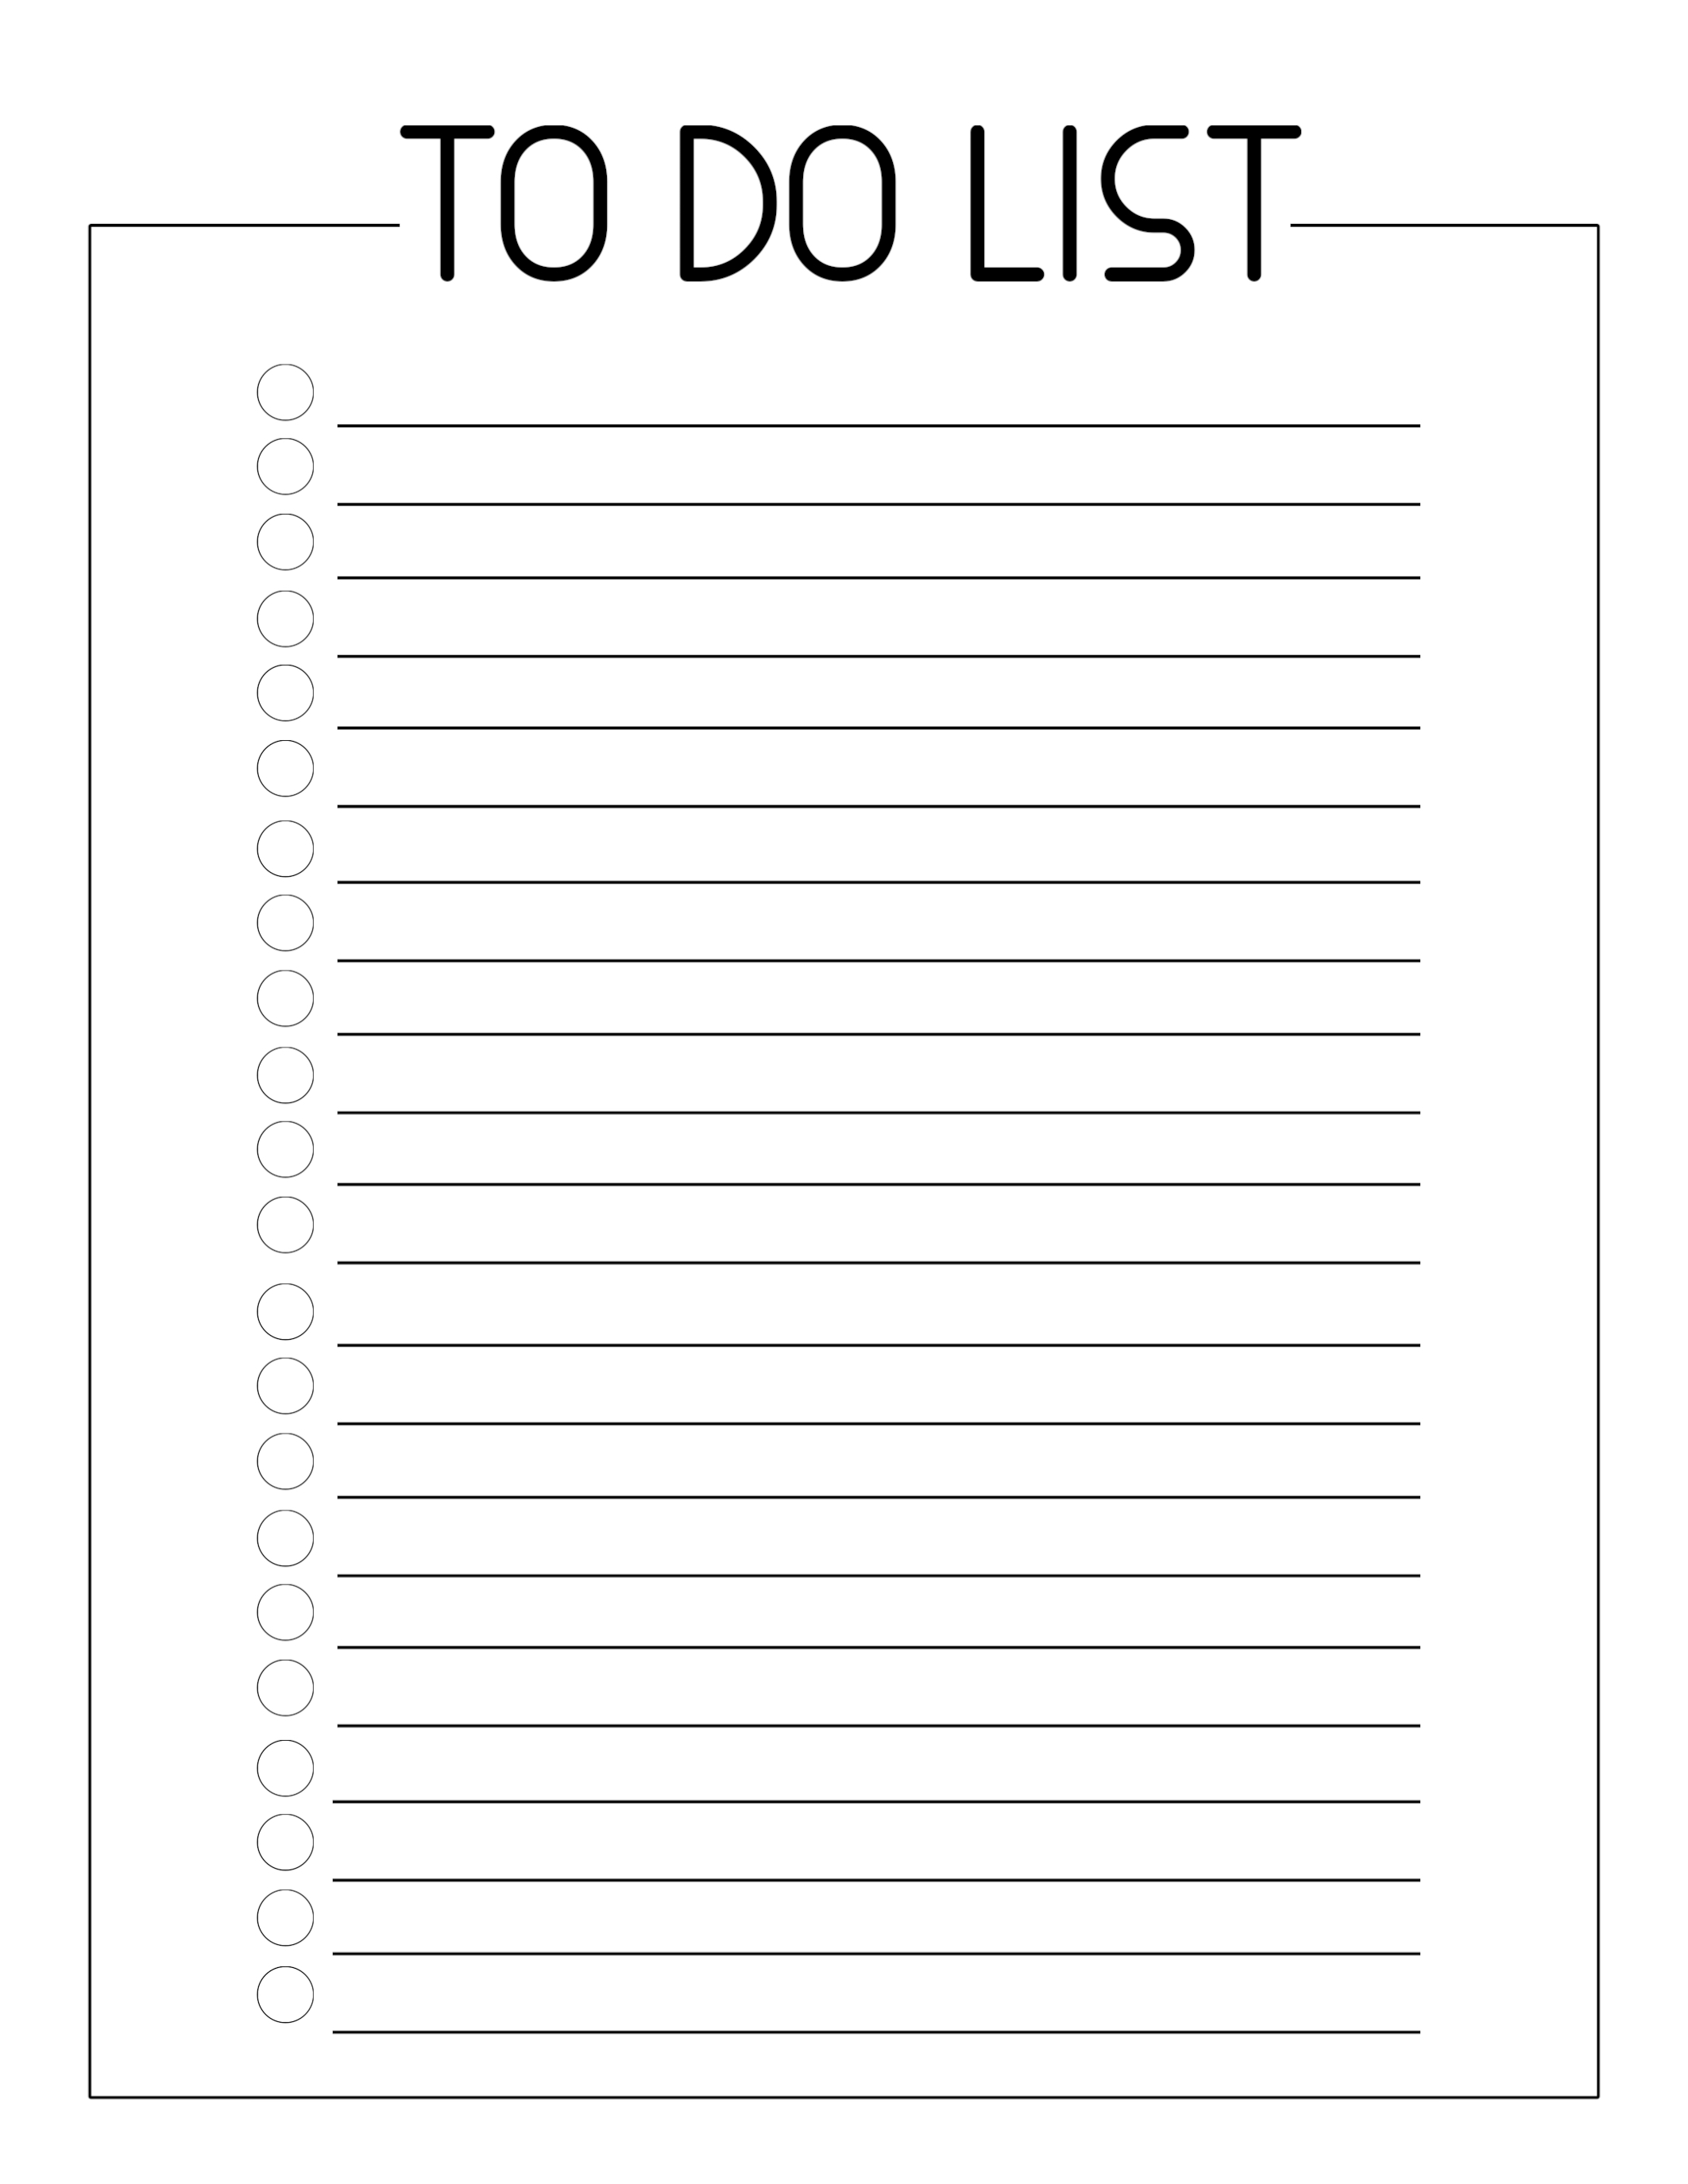 Free Printable To Do Checklist Template - Paper Trail Design